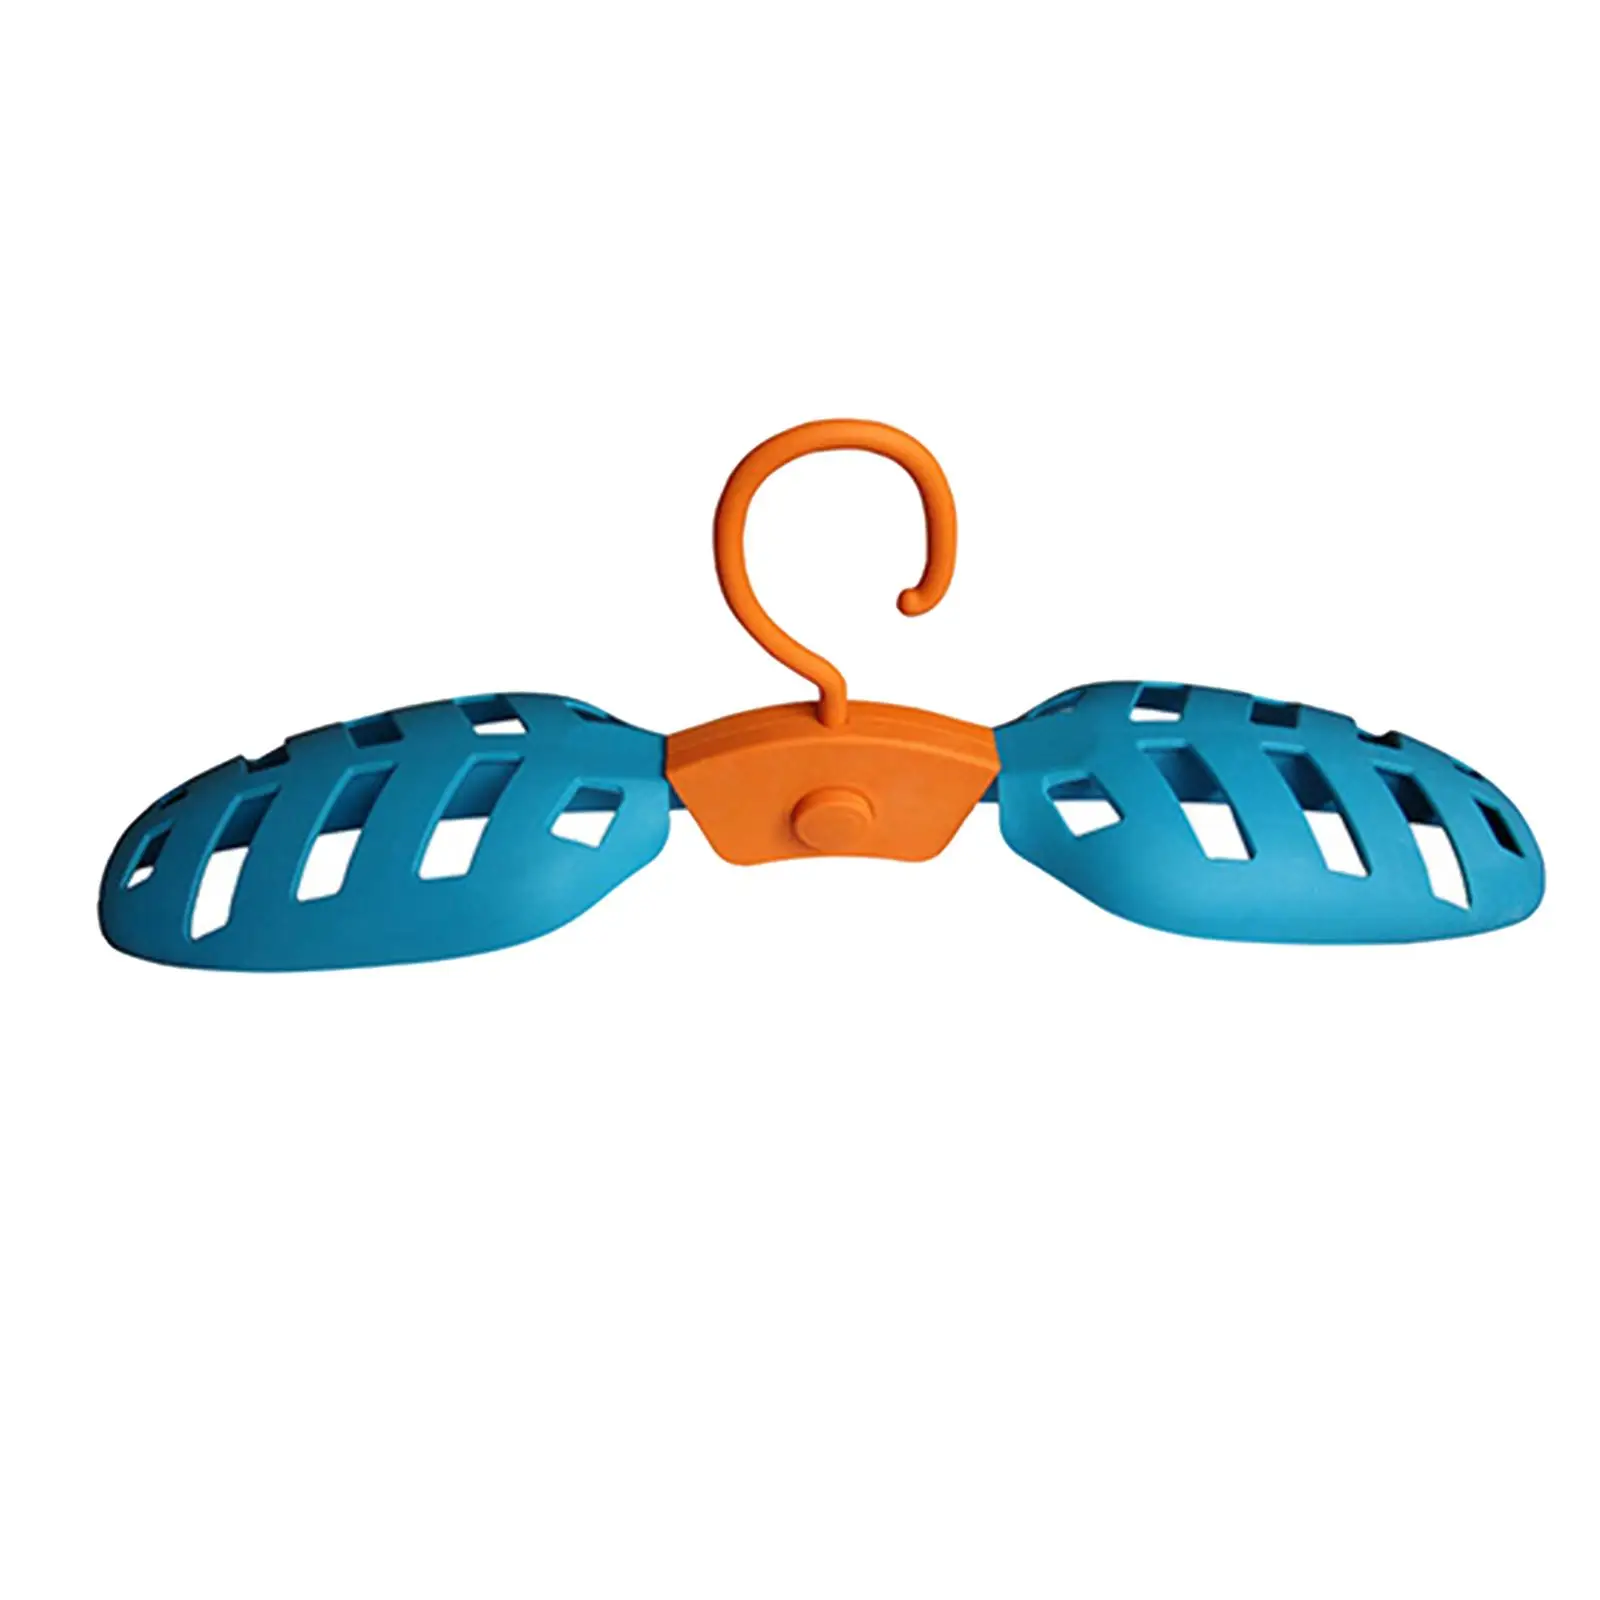 Foldable Practical Water Sports Accessory,Diving Surfing Snorkeling Storage Blue Perfeclan Wetsuit Hanger Drying Rack 